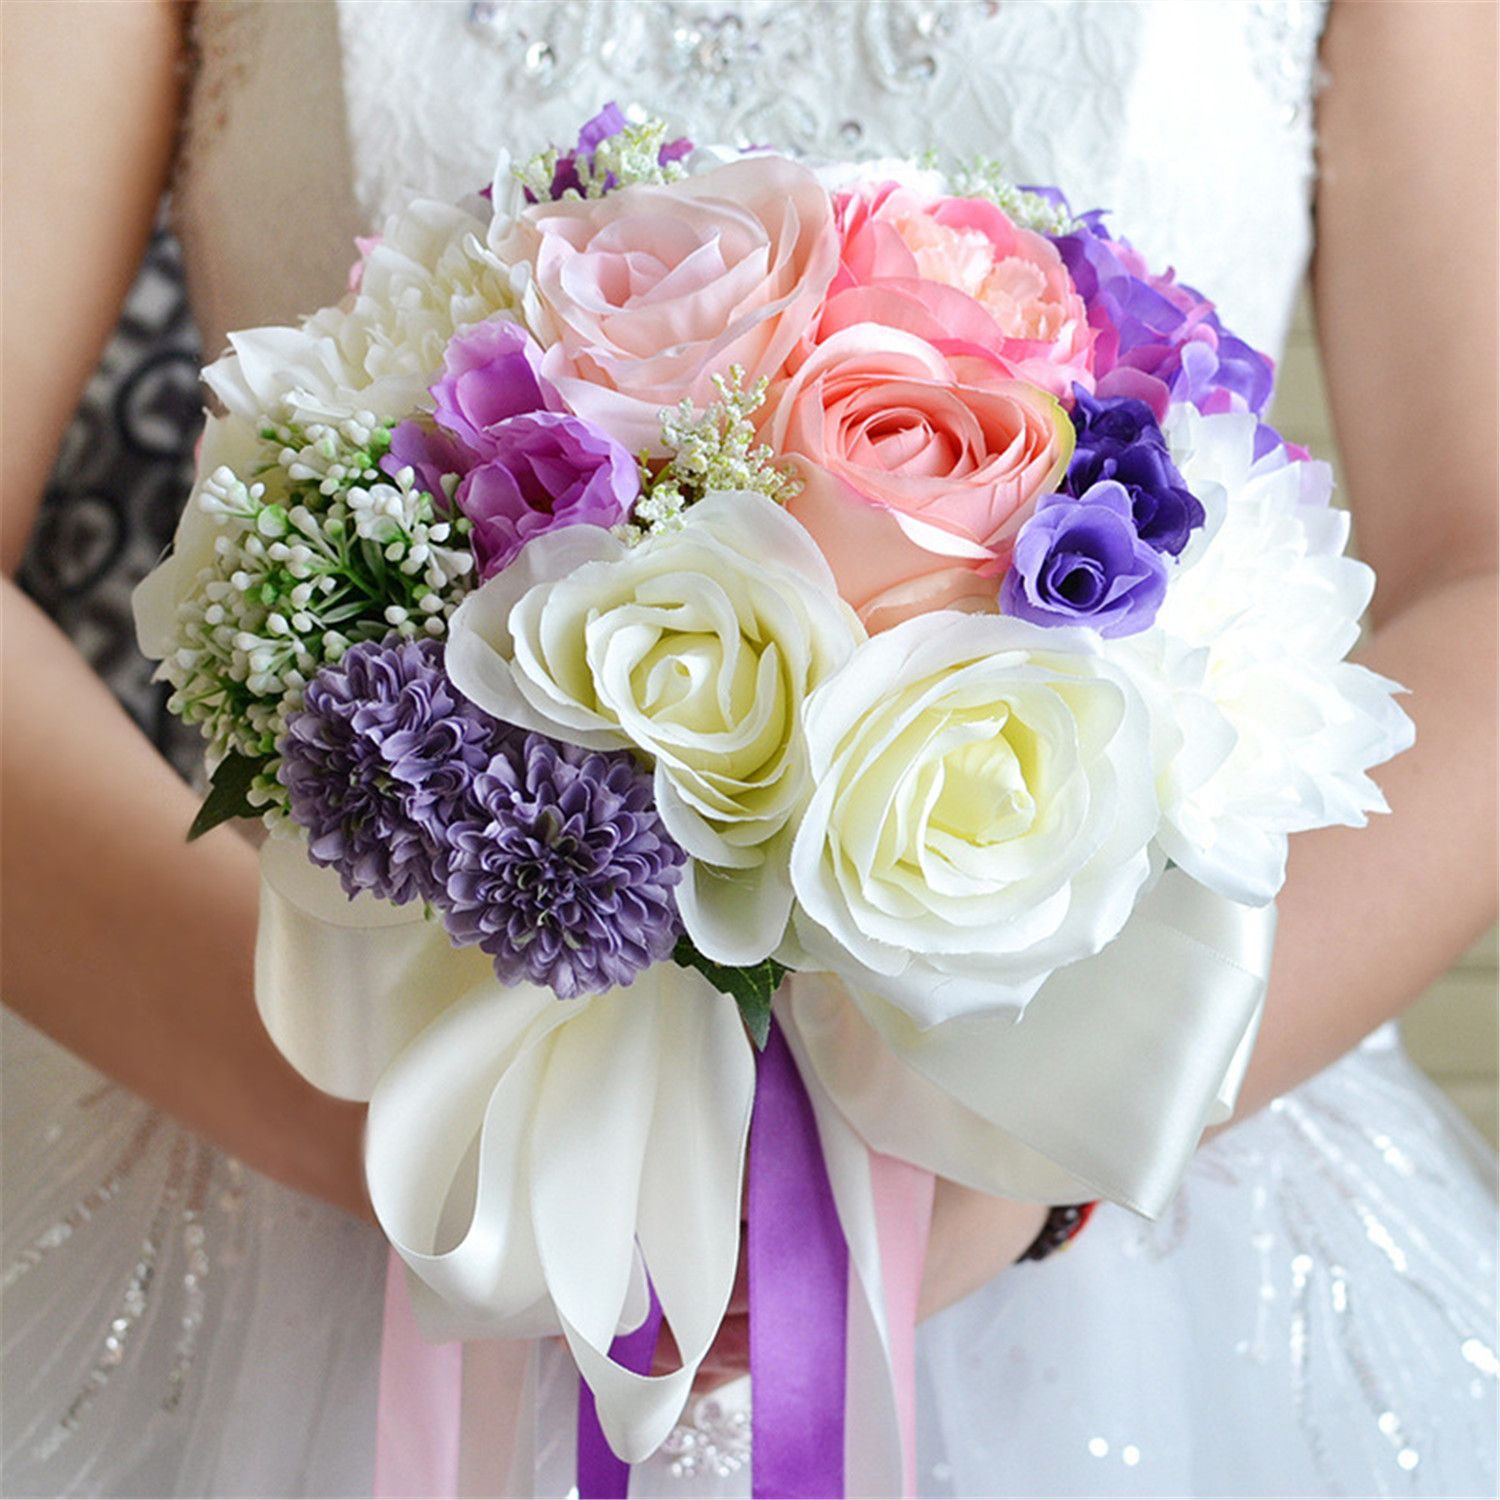 Wf050pp Pink Purple Beach Wedding Bouquet Boho Silk Flowers Wedding Bridal Bridesmaid Flowers Decorations For Special Day Summer Australia 2019 From